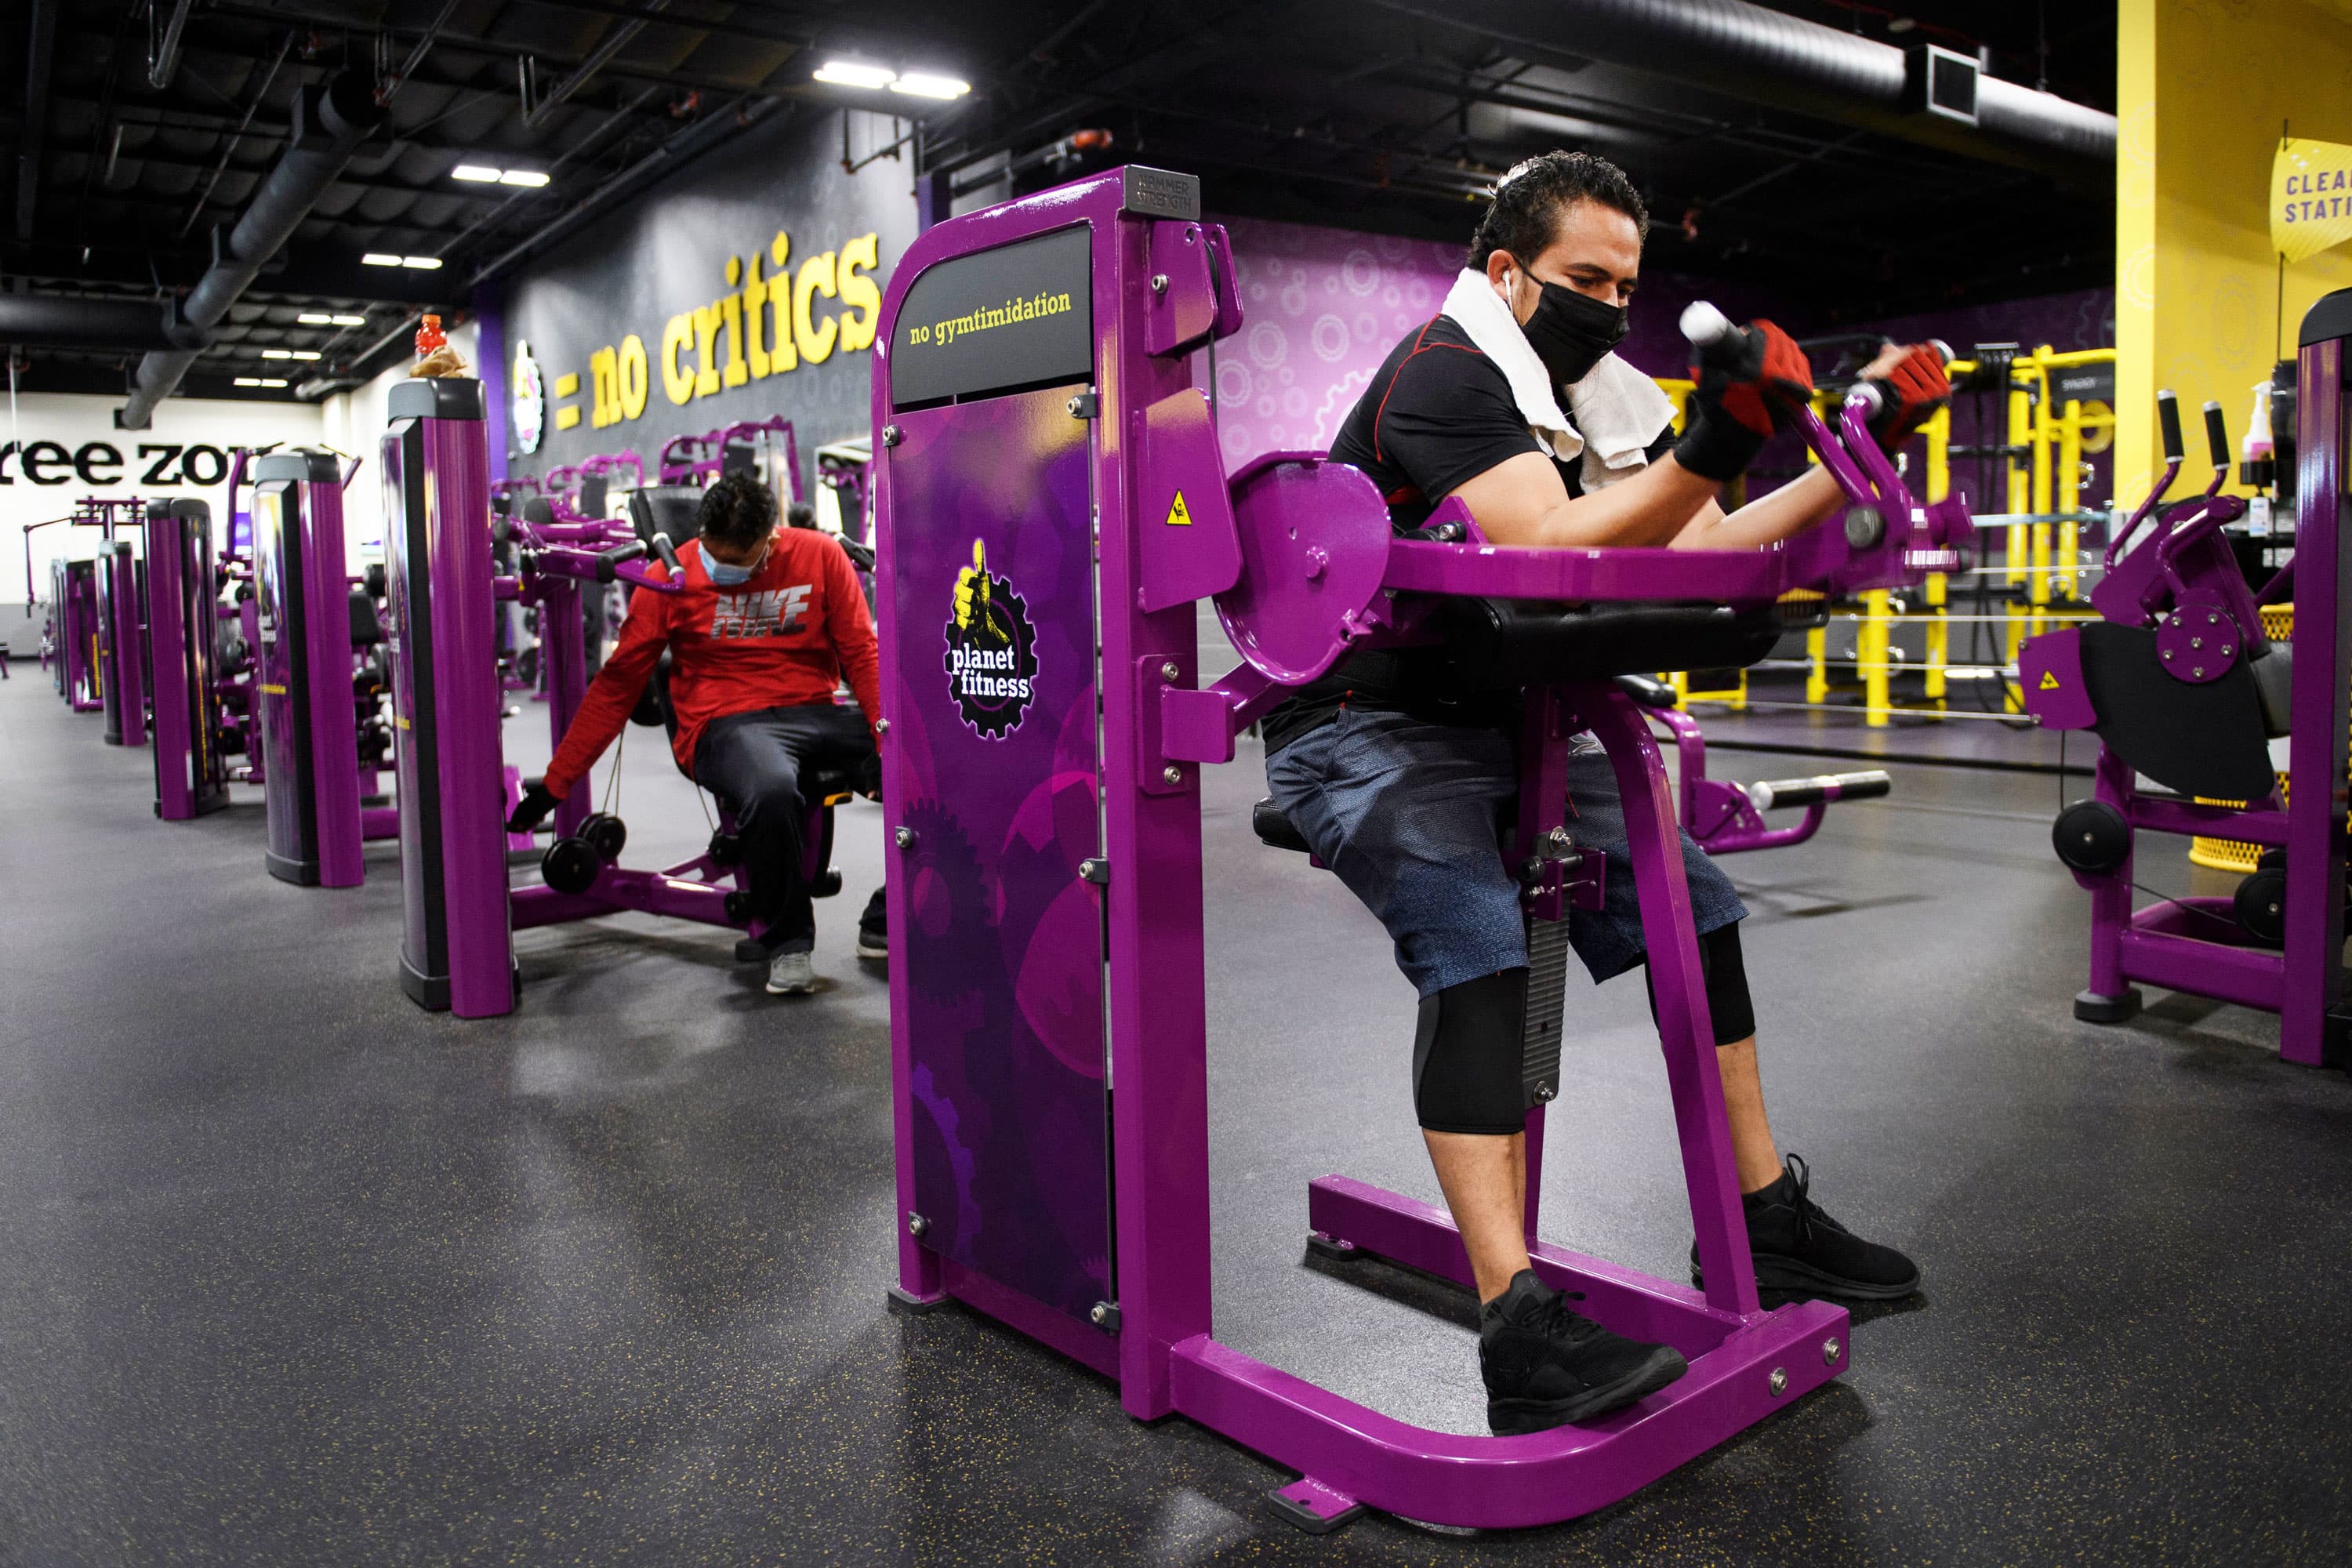 Americans back to gyms, interest in at-home workout wanes: Jefferies